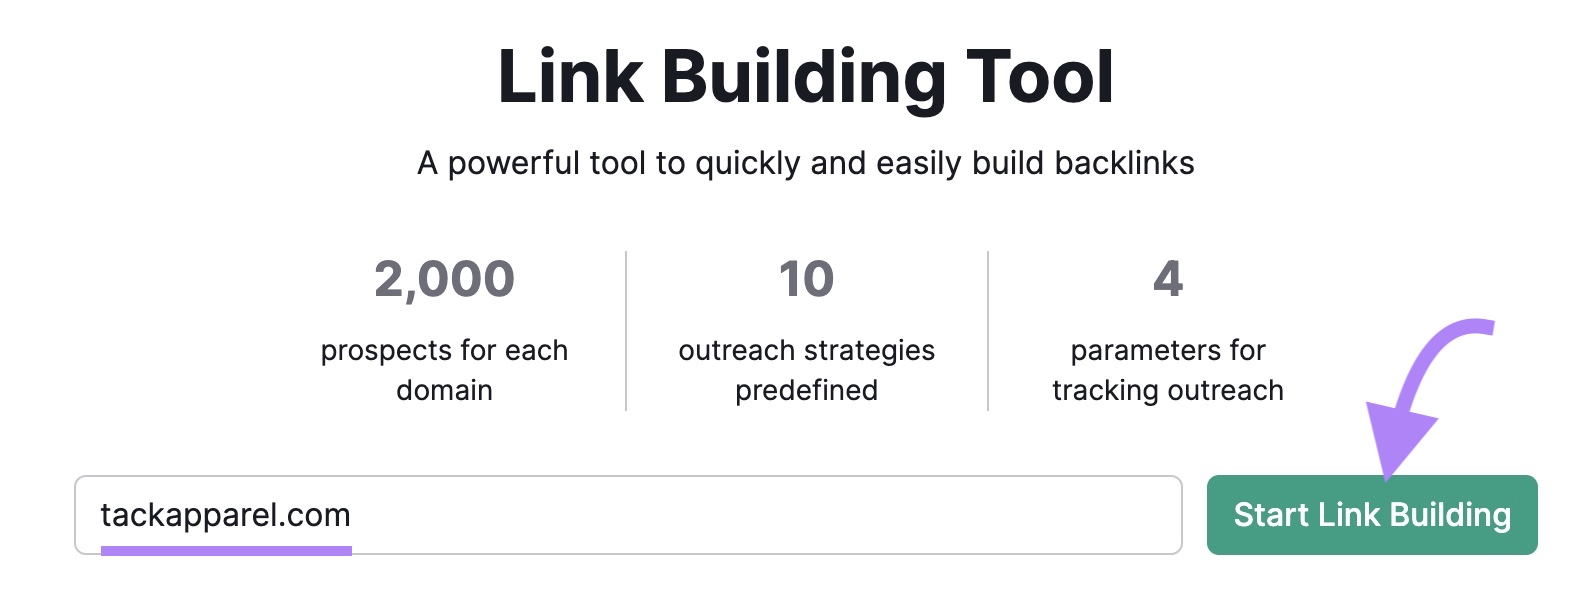 Link Building Tool start page with "tackapparel.com" entered as the domain and "Start Link Building" clicked.